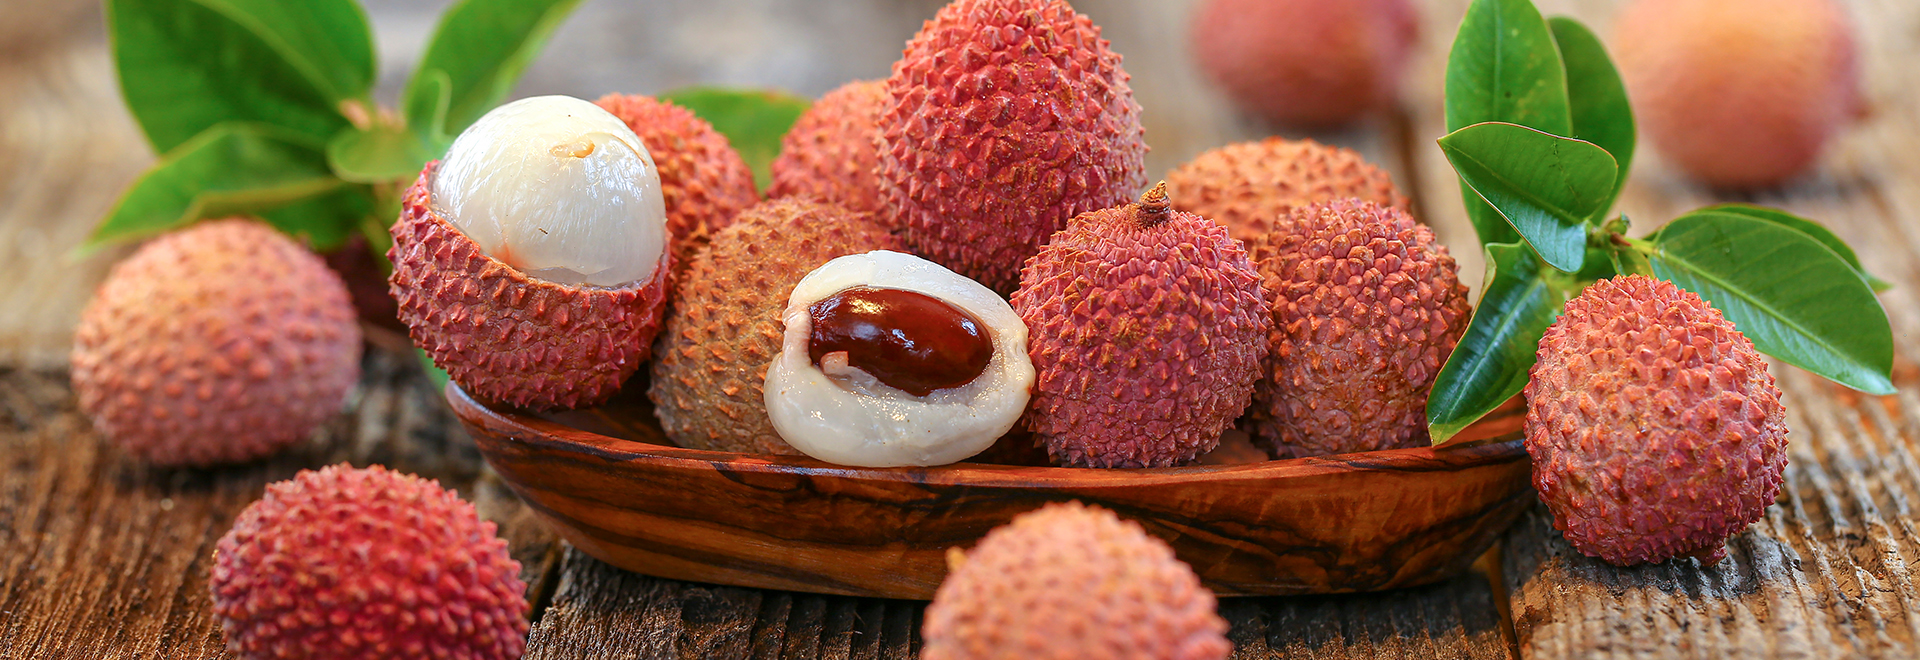 lychee-things-to-know-and-diet-tips